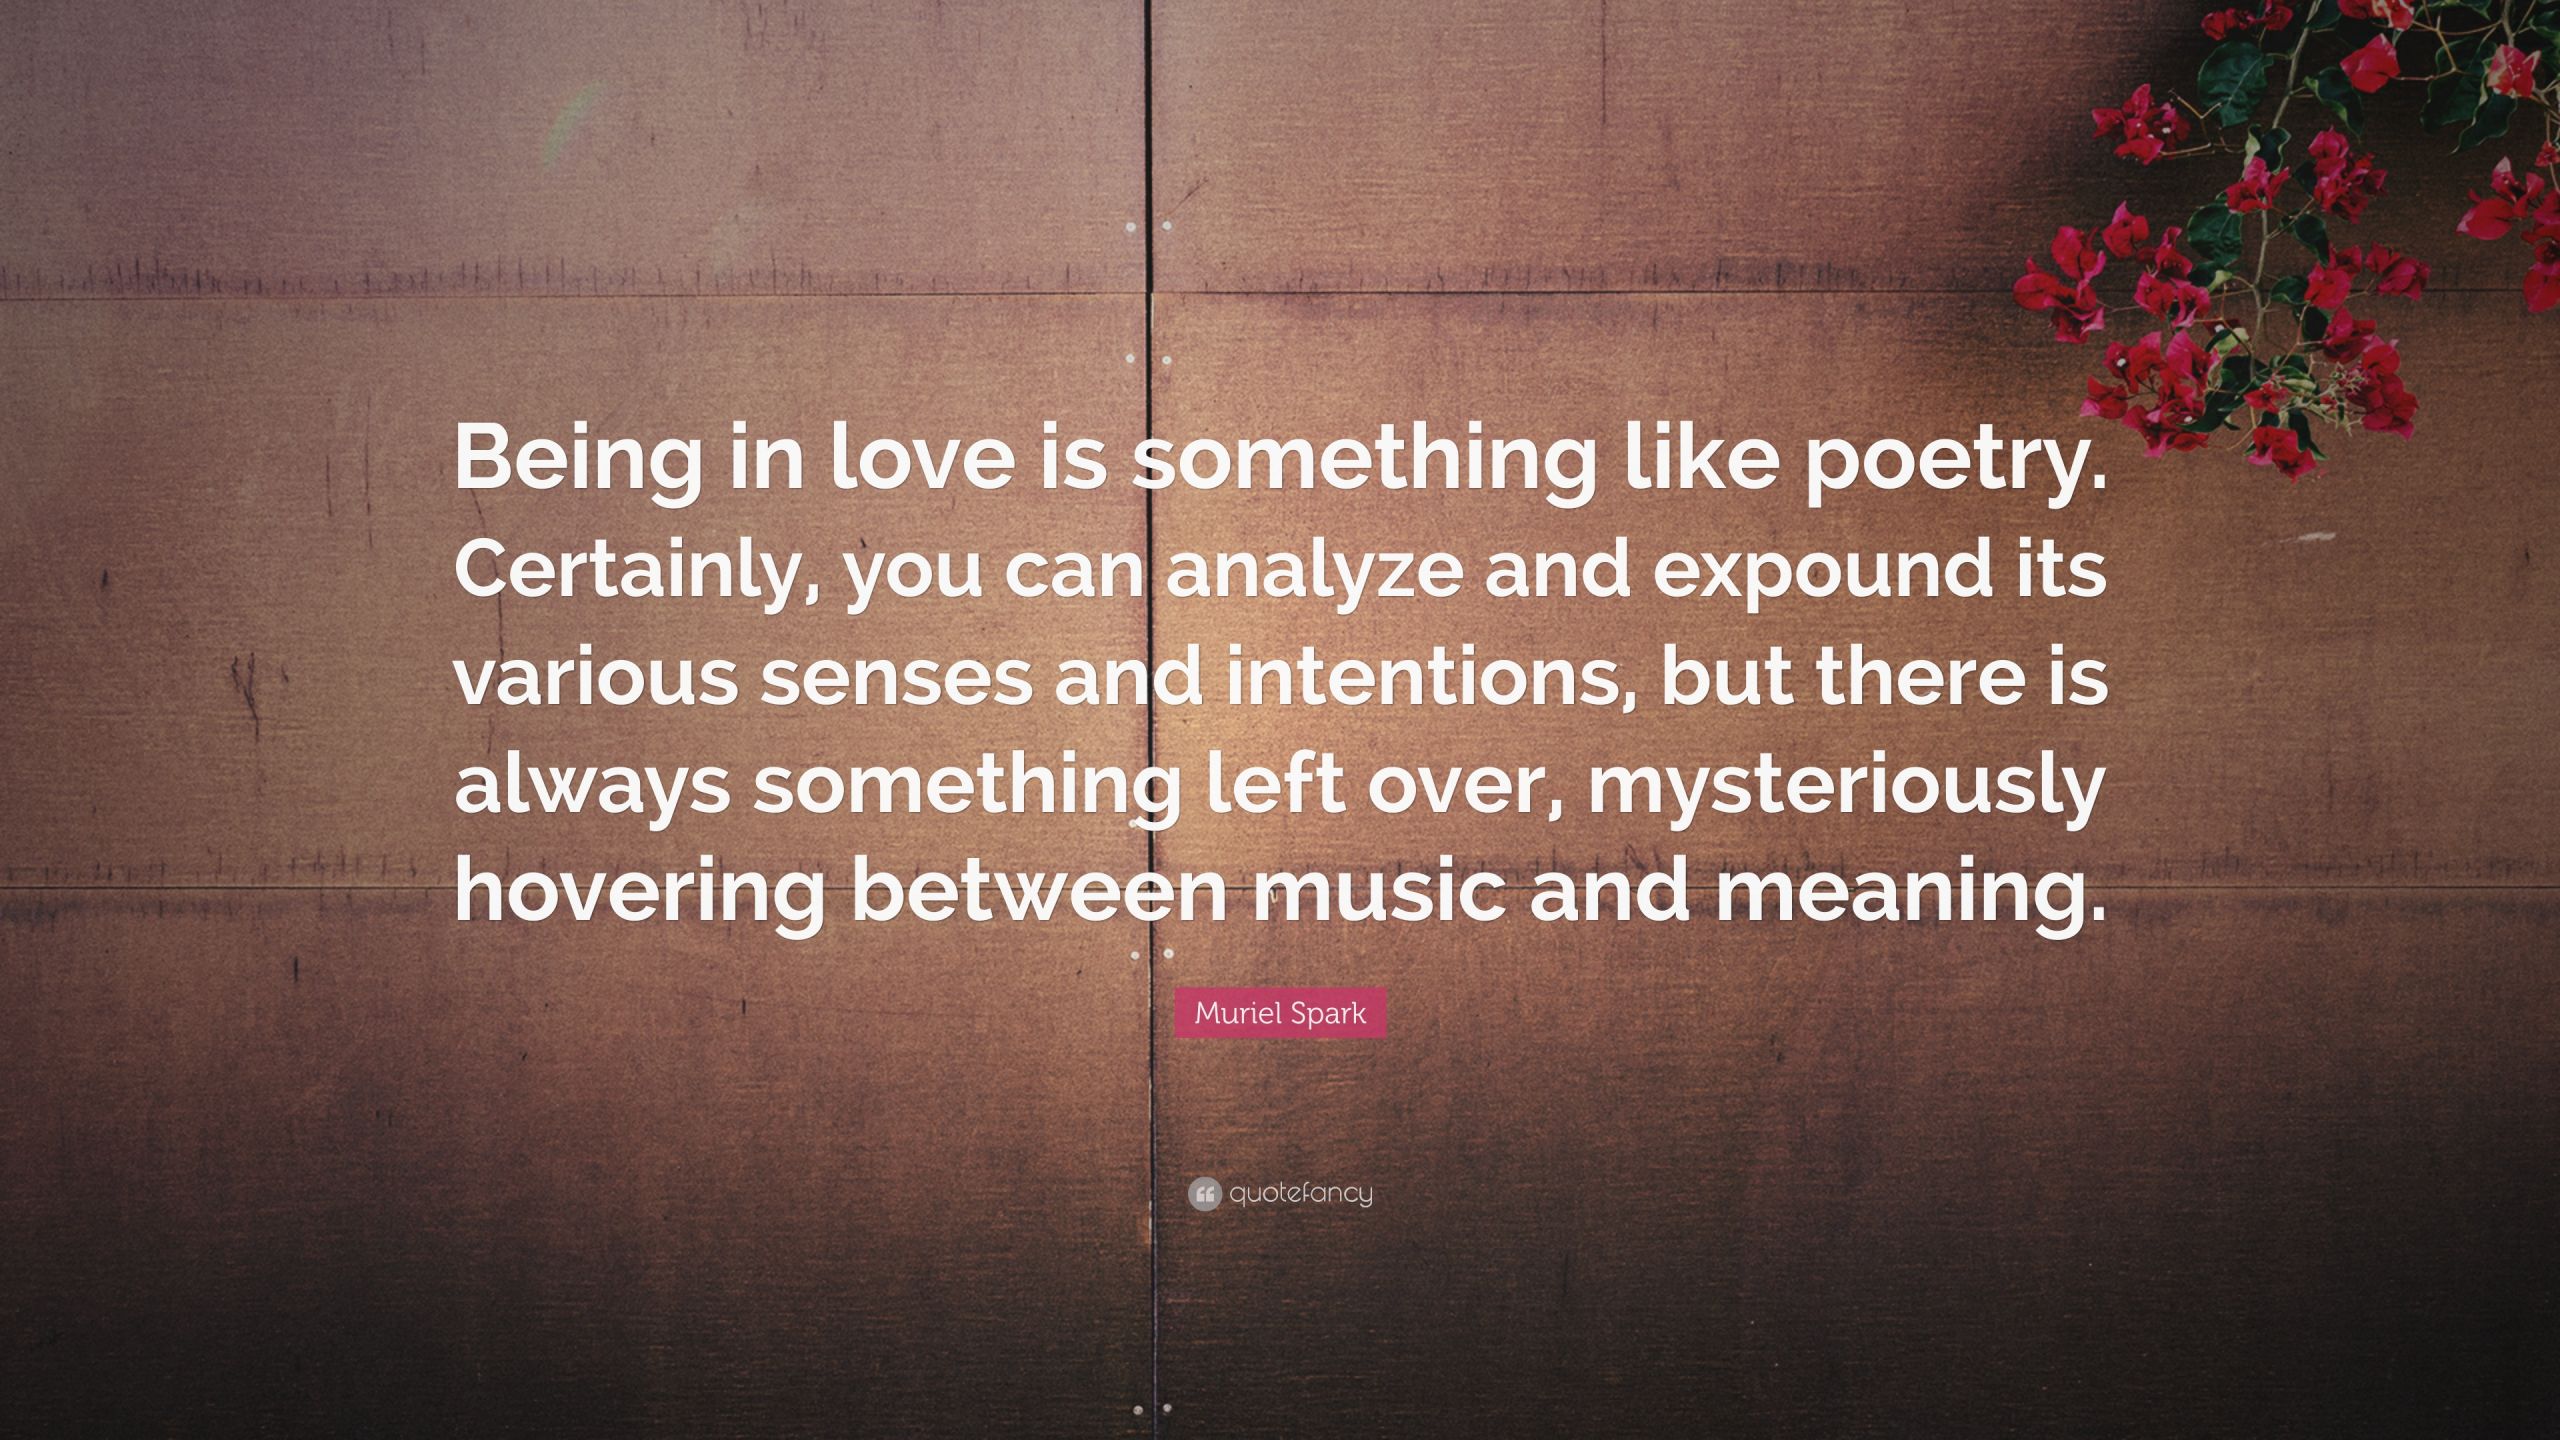 Quotes On Being Inlove
 Muriel Spark Quote “Being in love is something like